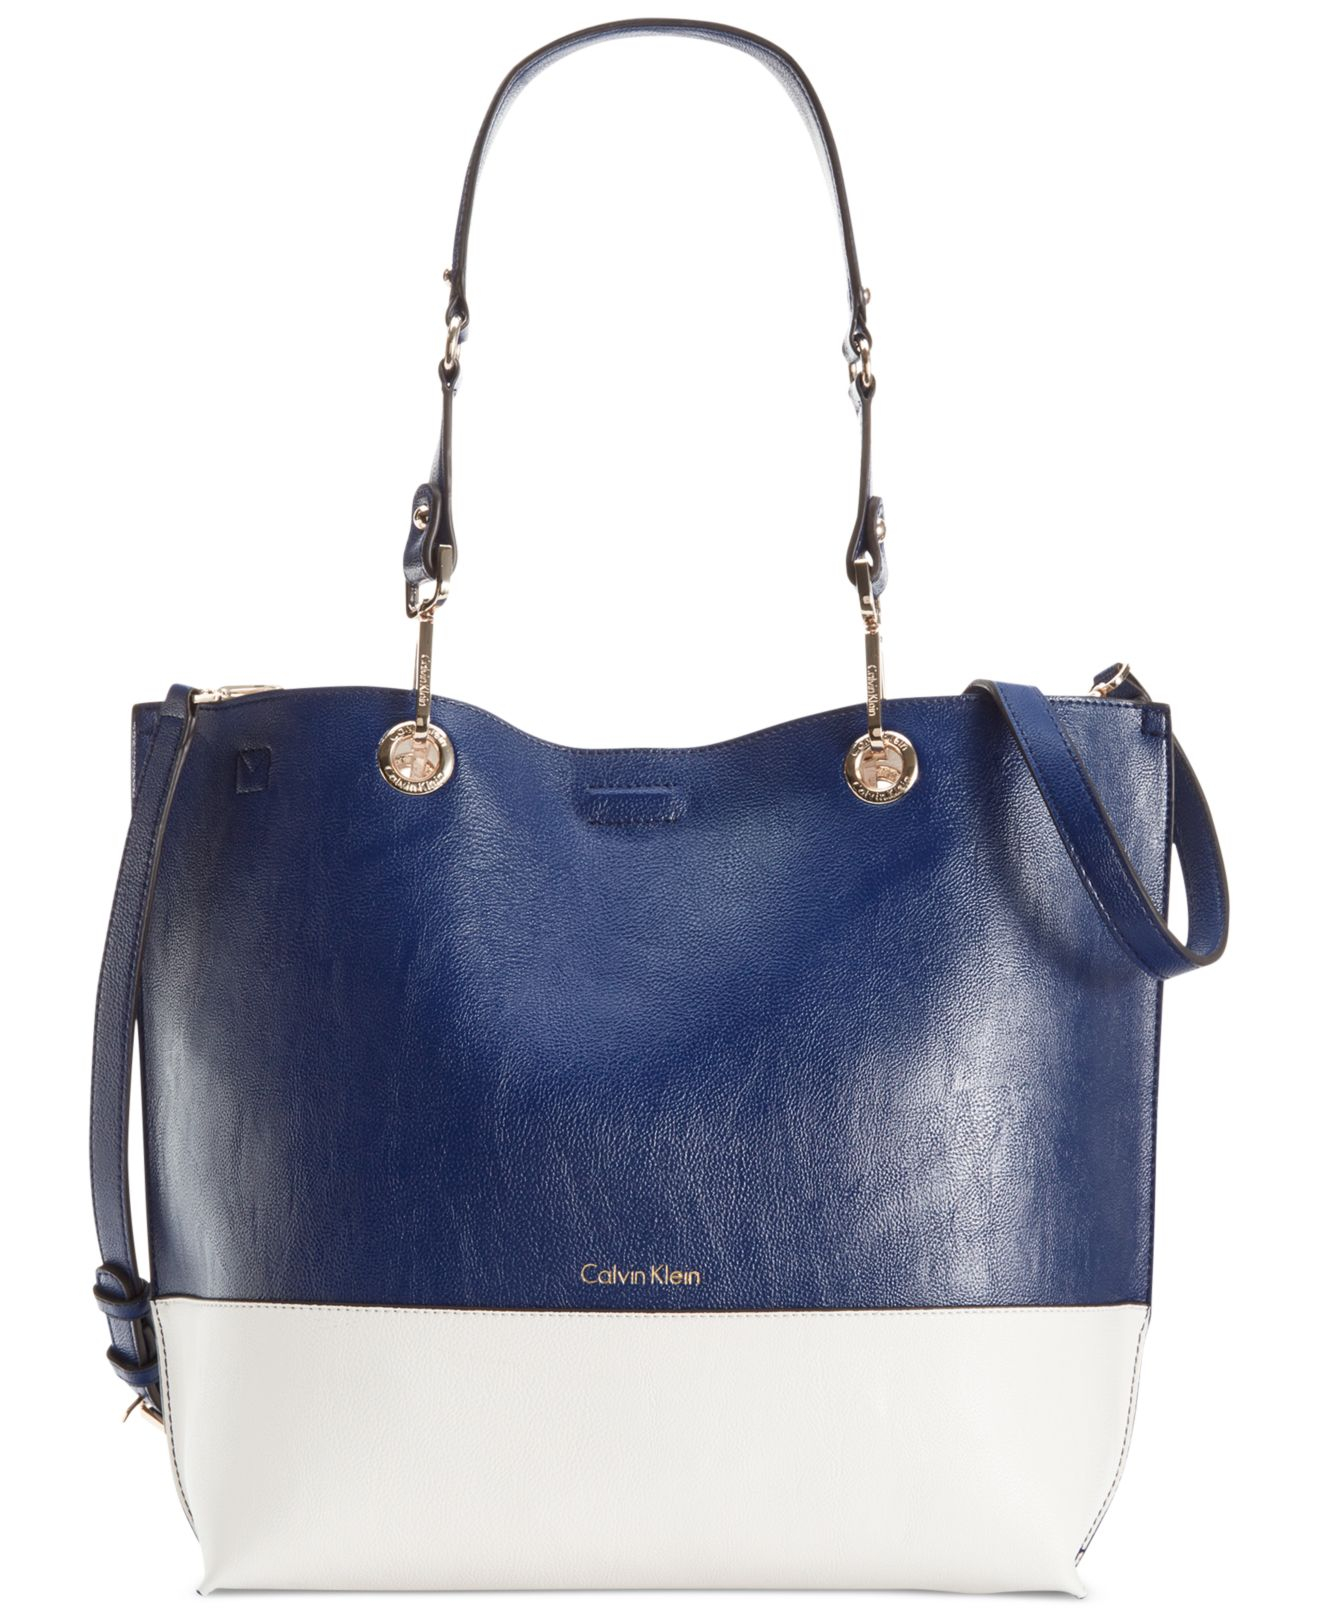 Calvin klein Reversible Tote With Pouch in Blue (Ink/White) | Lyst